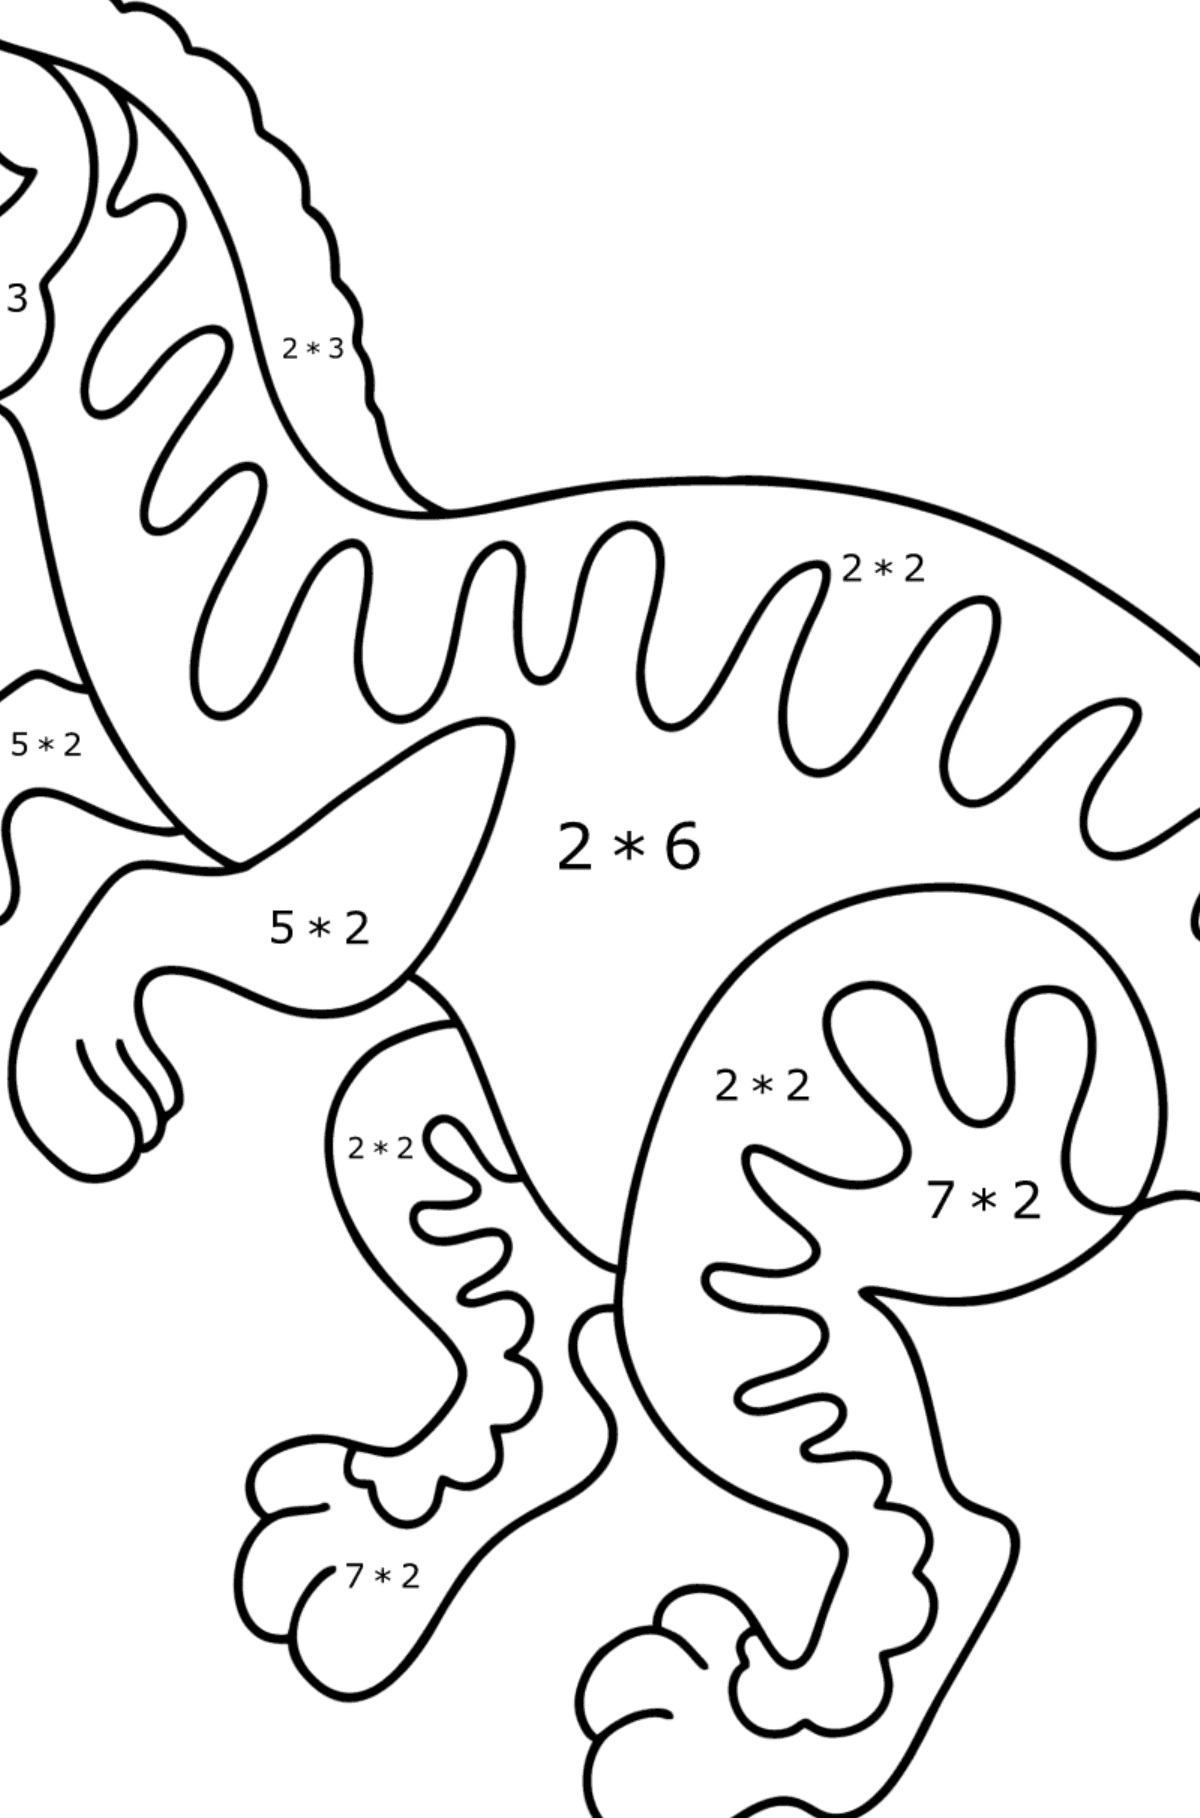 Velociraptor coloring page - Math Coloring - Multiplication for Kids